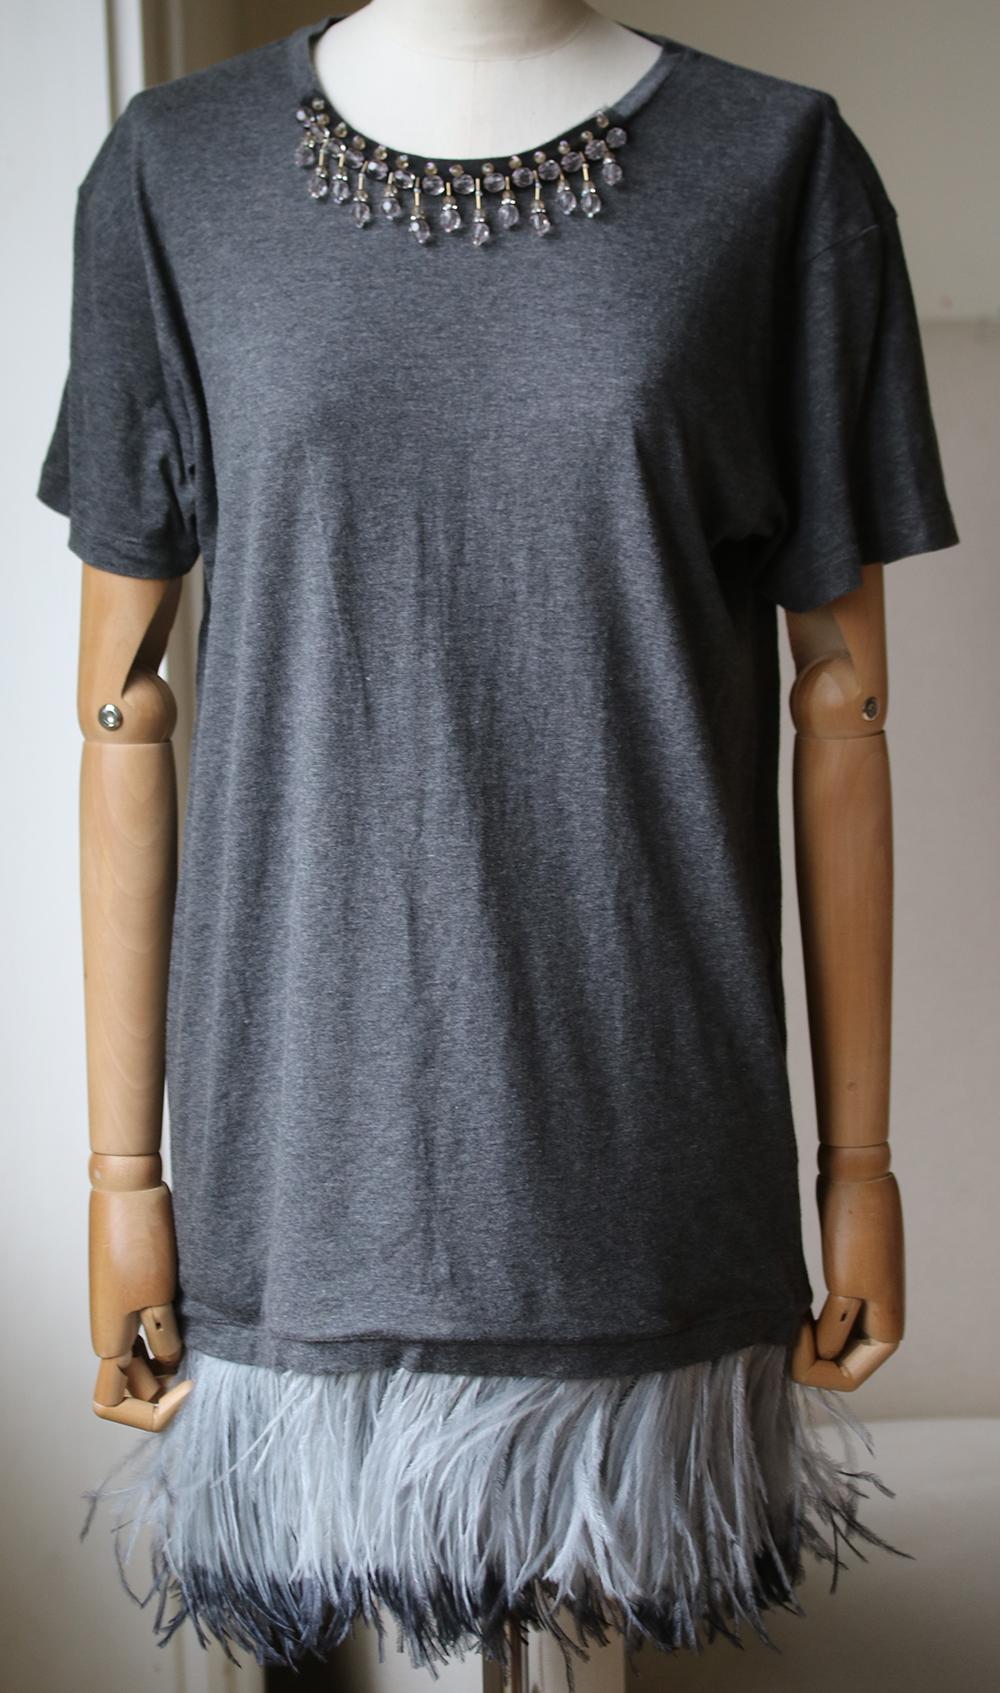 Cotton T-shirt featuring a round neck, short sleeves, embellishments at the neck and a feather detailed hem. 100% softest Ostrich feathers from South Africa. 60% Cotton, 40% Viscose. Colour: grey.

Size: One Size

Condition: New with tags. 